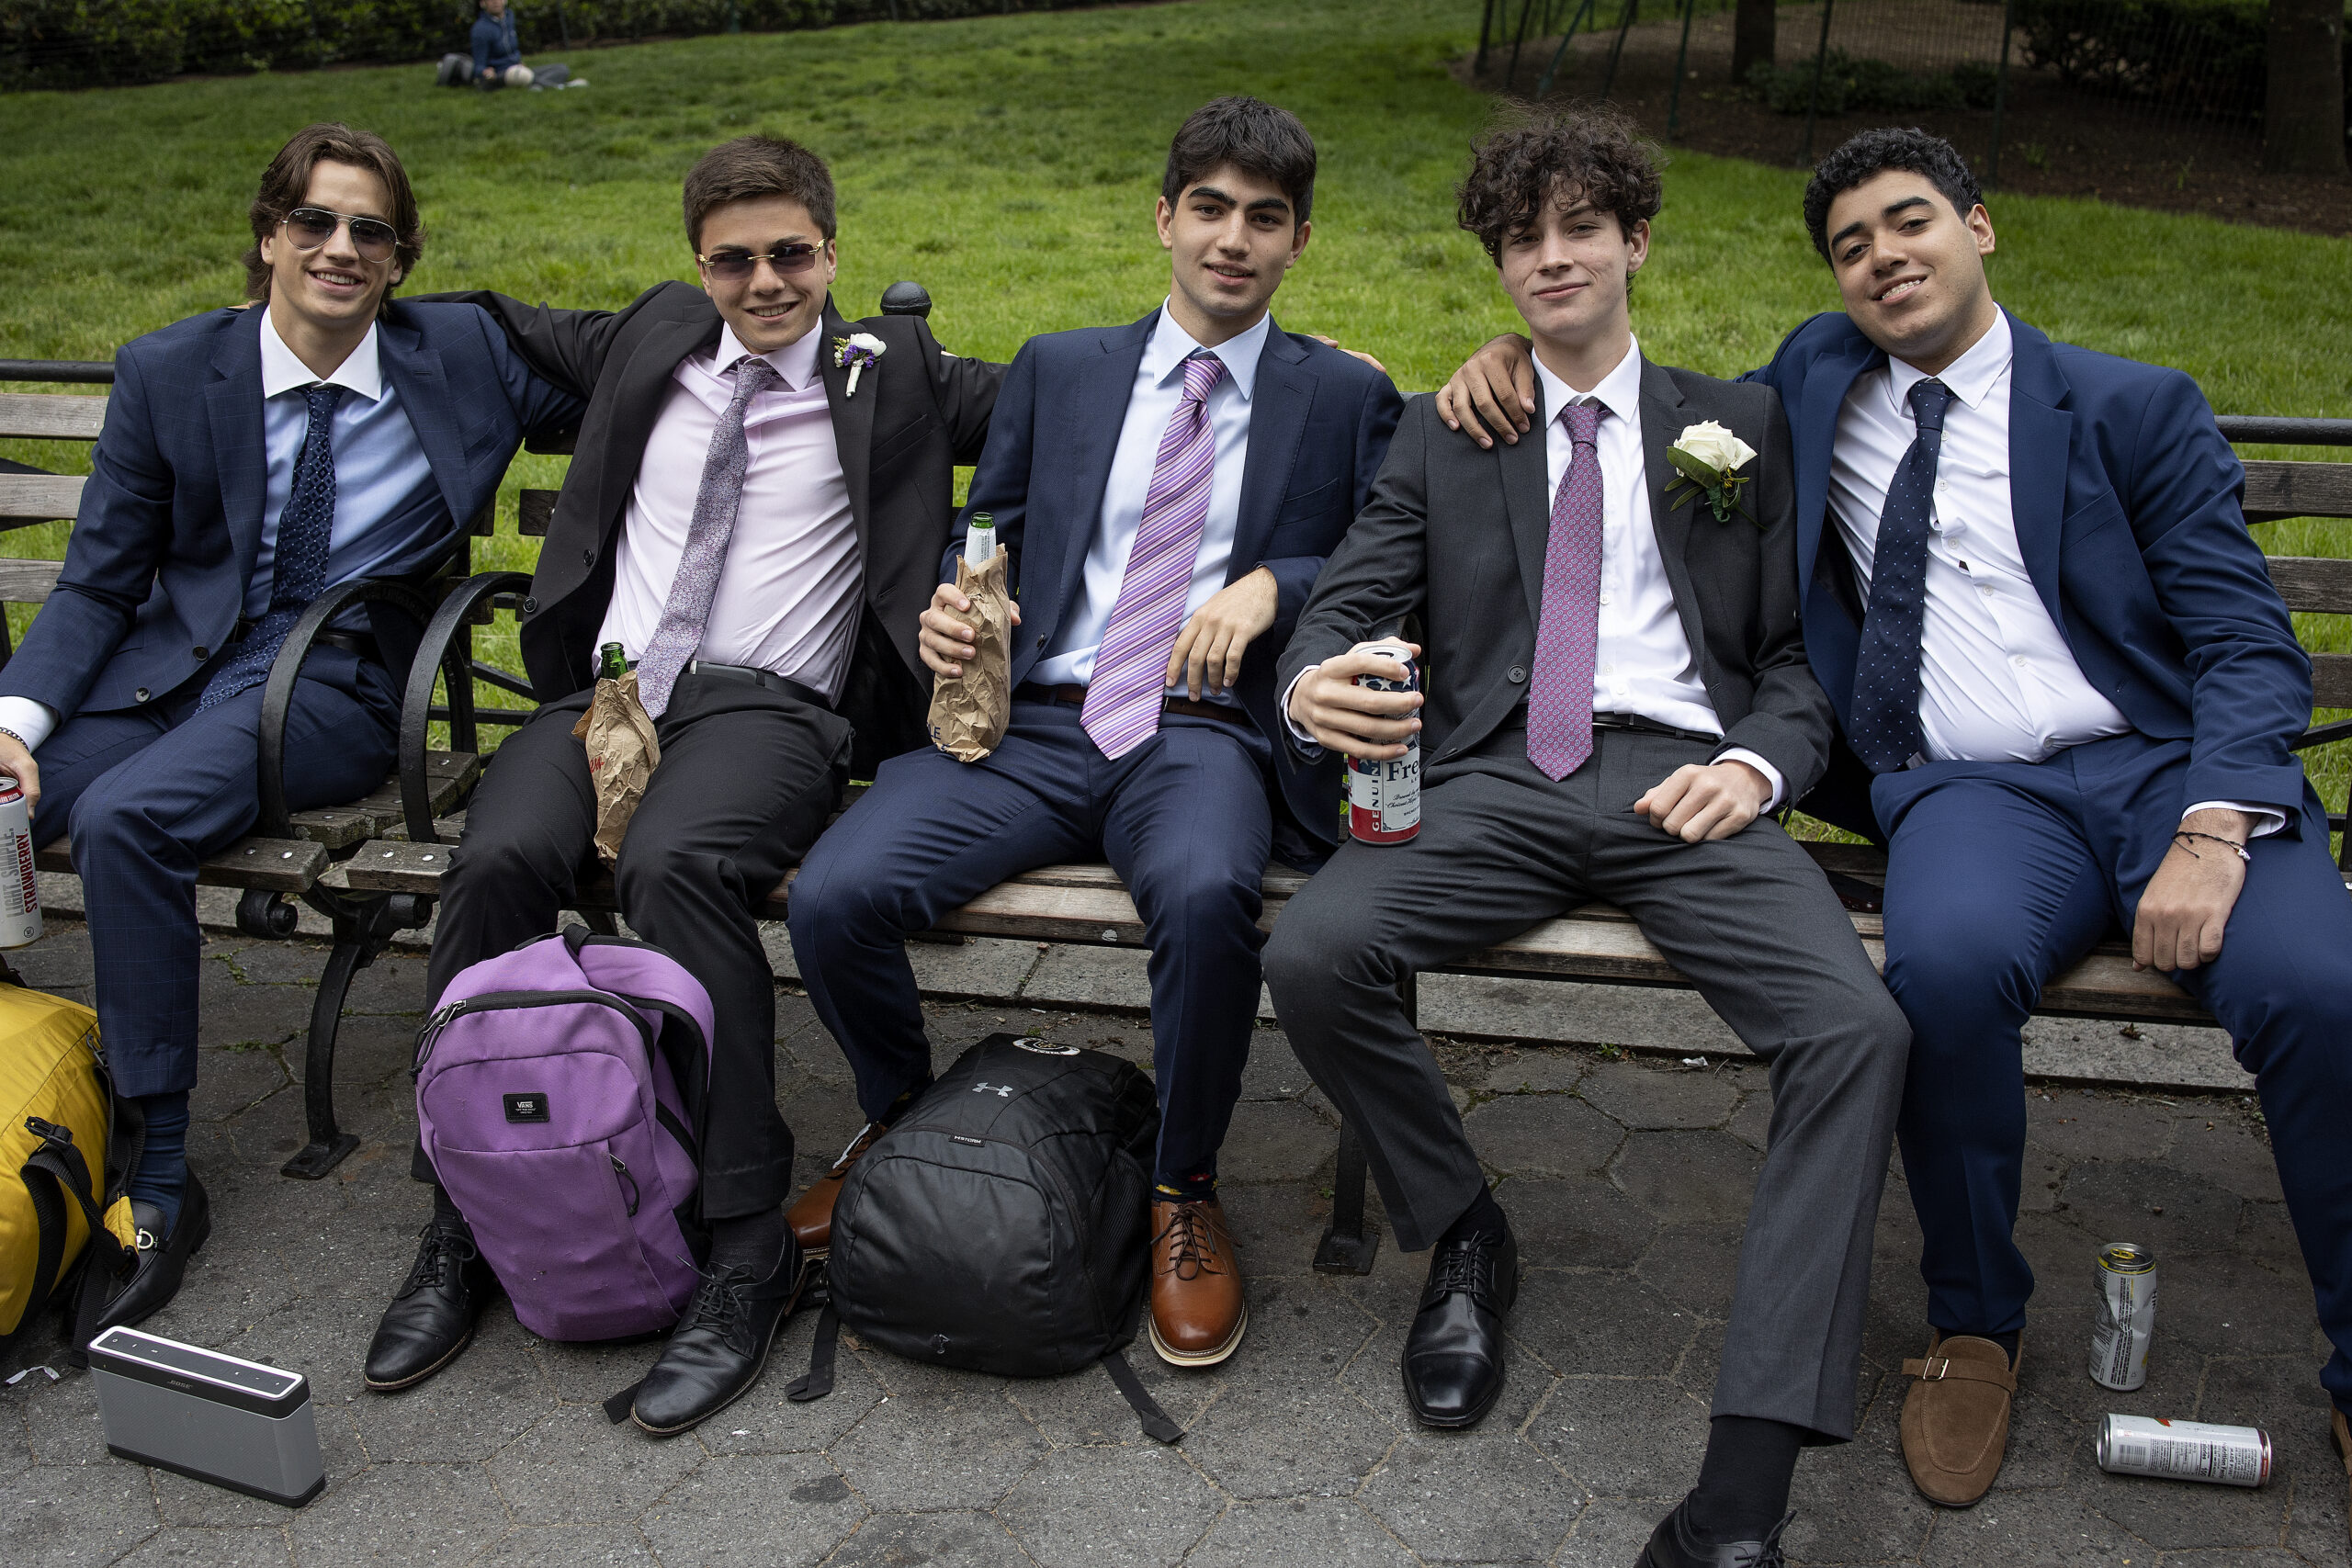 NEW YORK, NEW YORK - MAY 26: High school senior boys prepare for prom night on May 26, 2022 in Union Square Park, New York City. (Photo by Andrew Lichtenstein/Corbis via Getty Images)